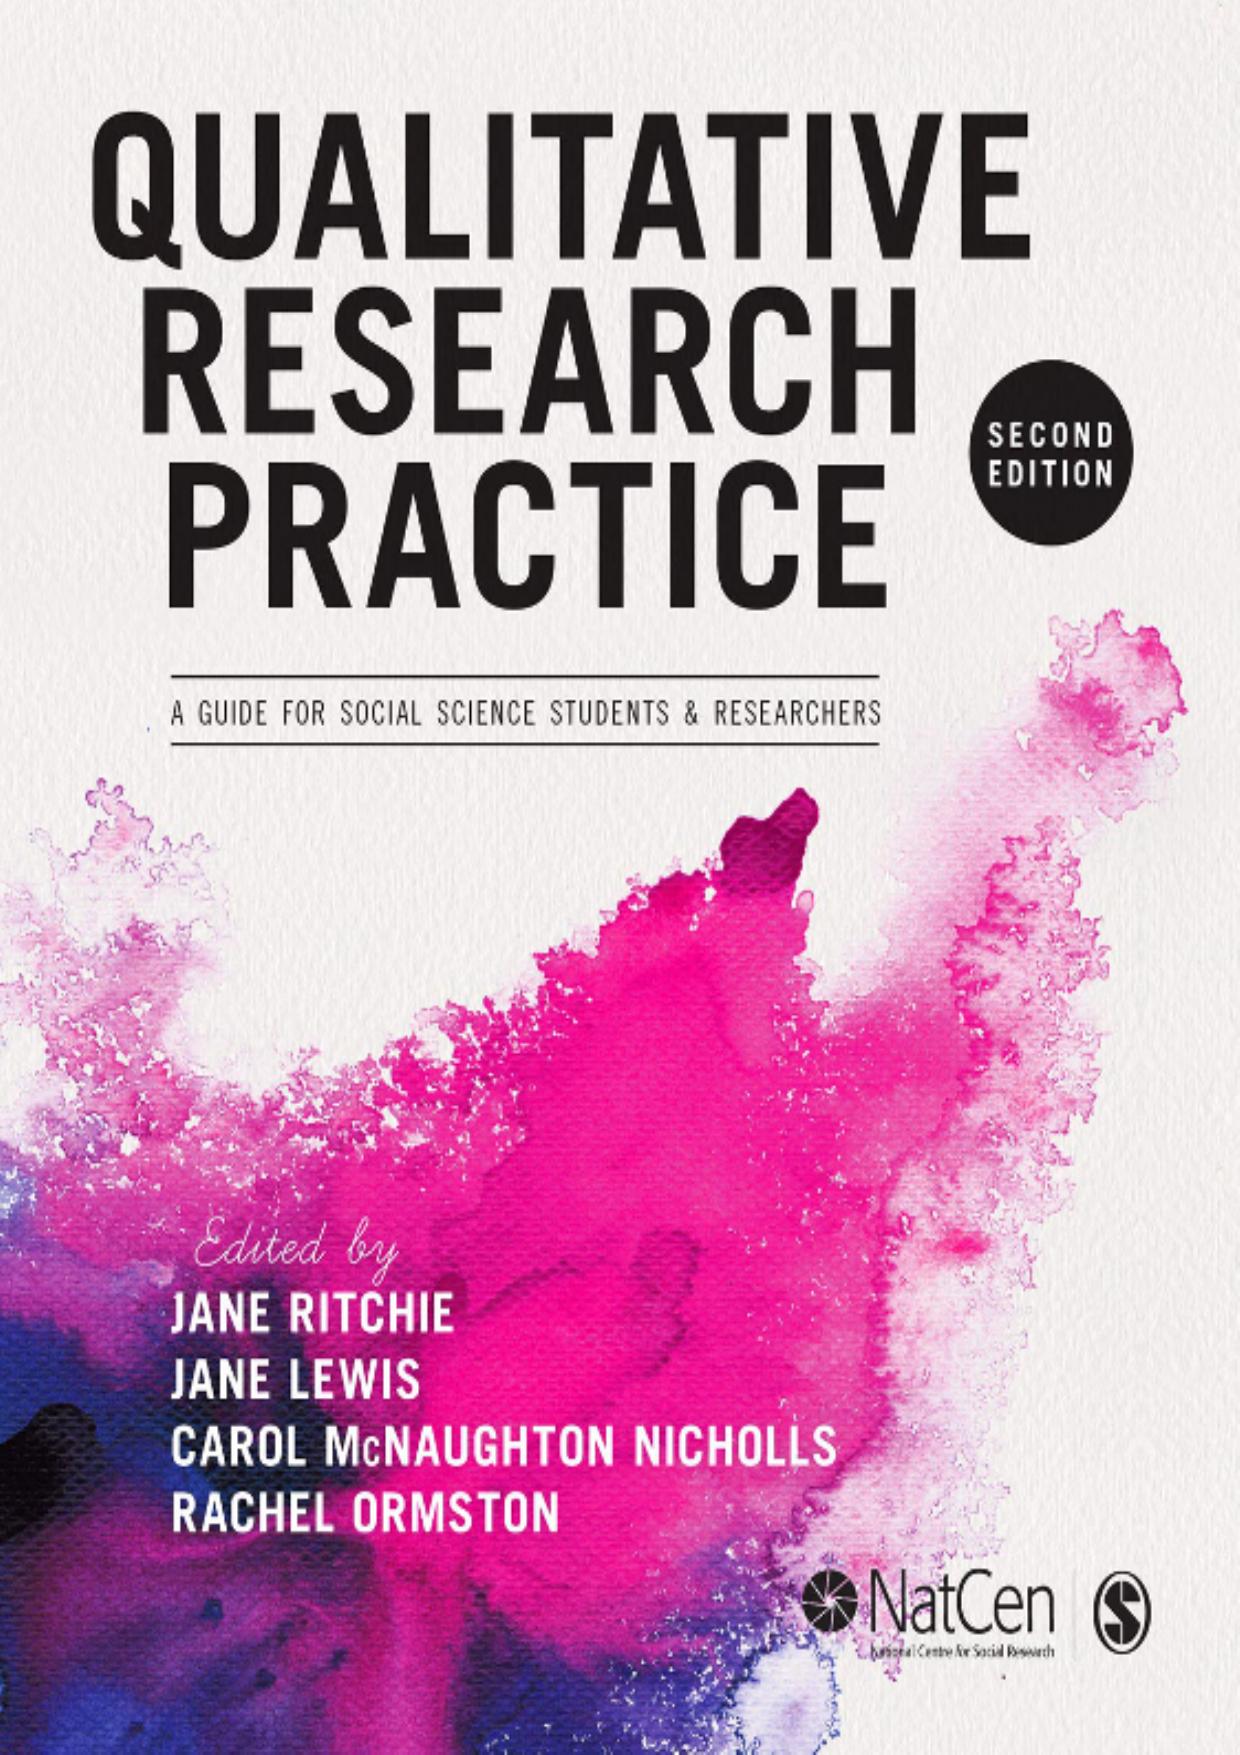 (eBook PDF)Qualitative Research Practice: A Guide for Social Science Students and Researchers Second Edition by Jane Ritchie,Jane Lewis